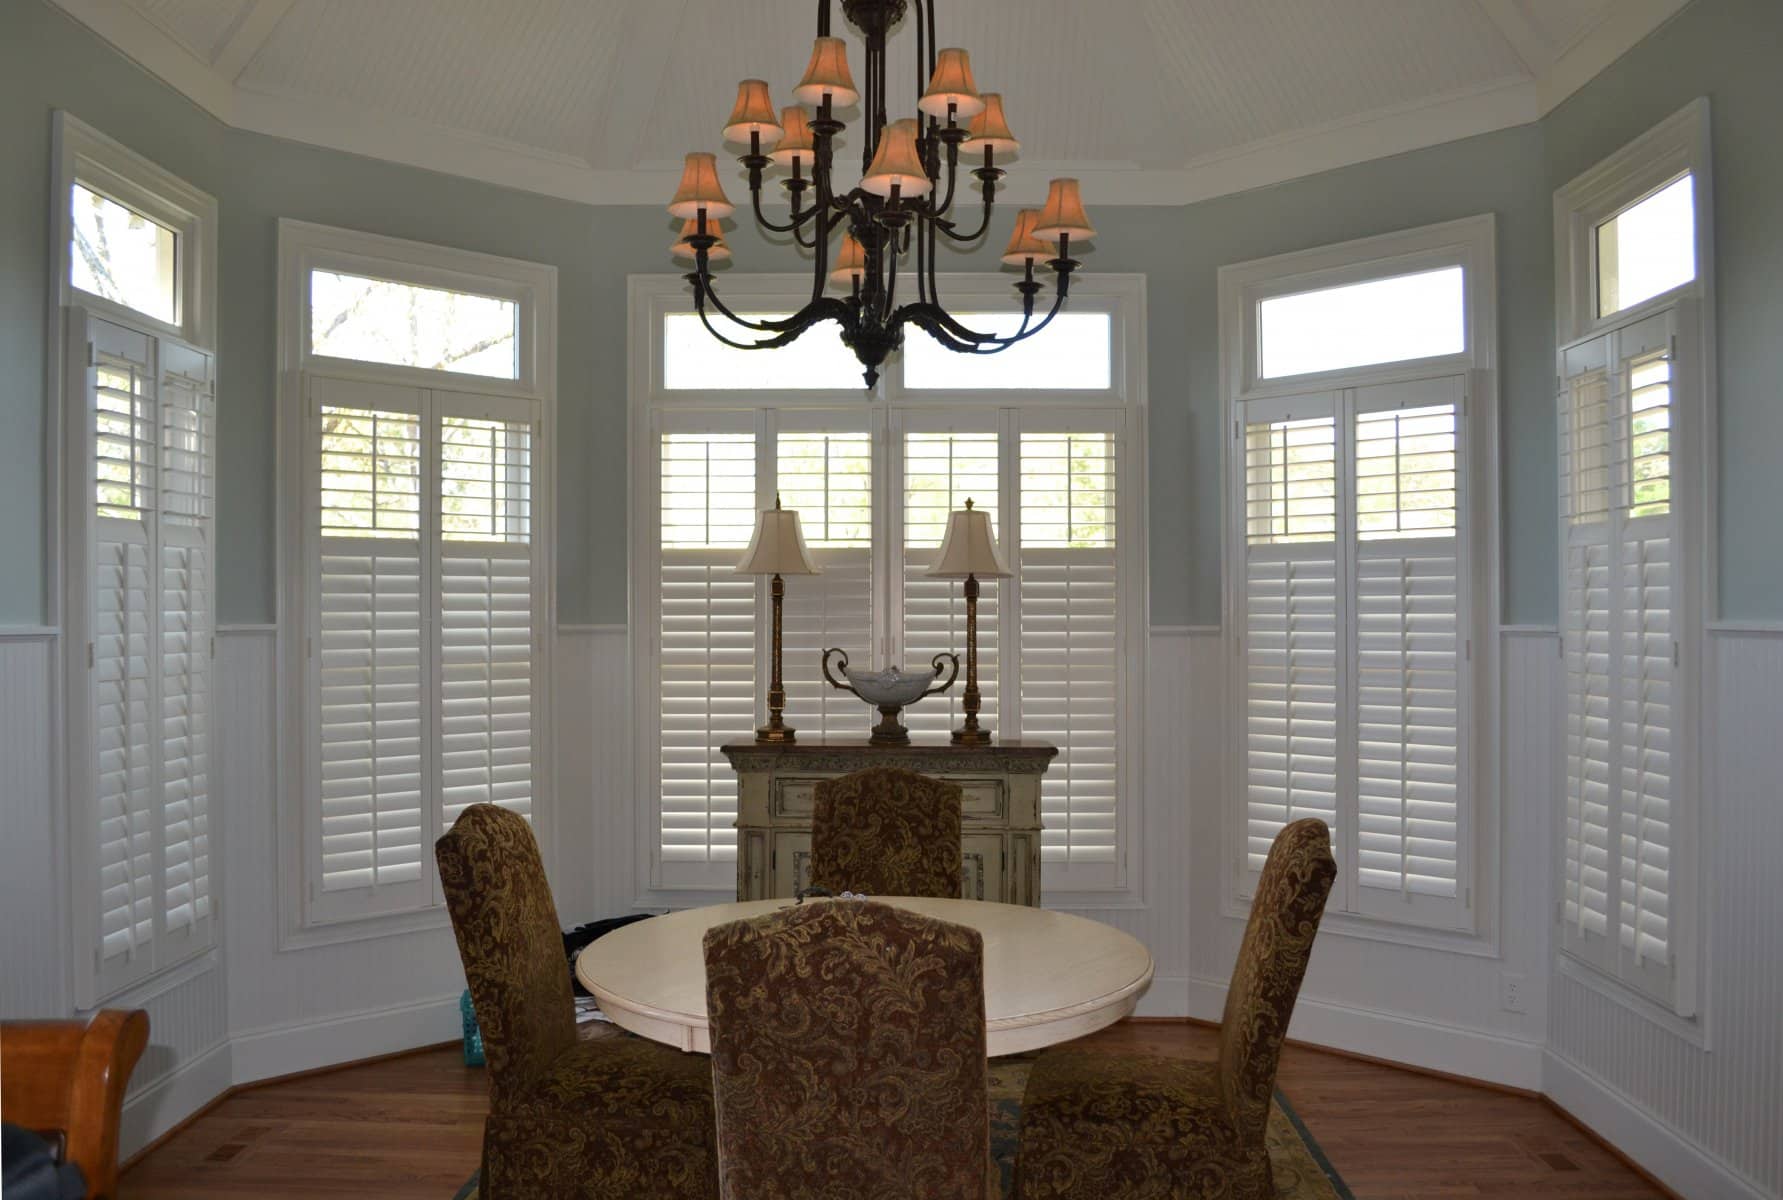 3" Custom Shutters in a Dining Room